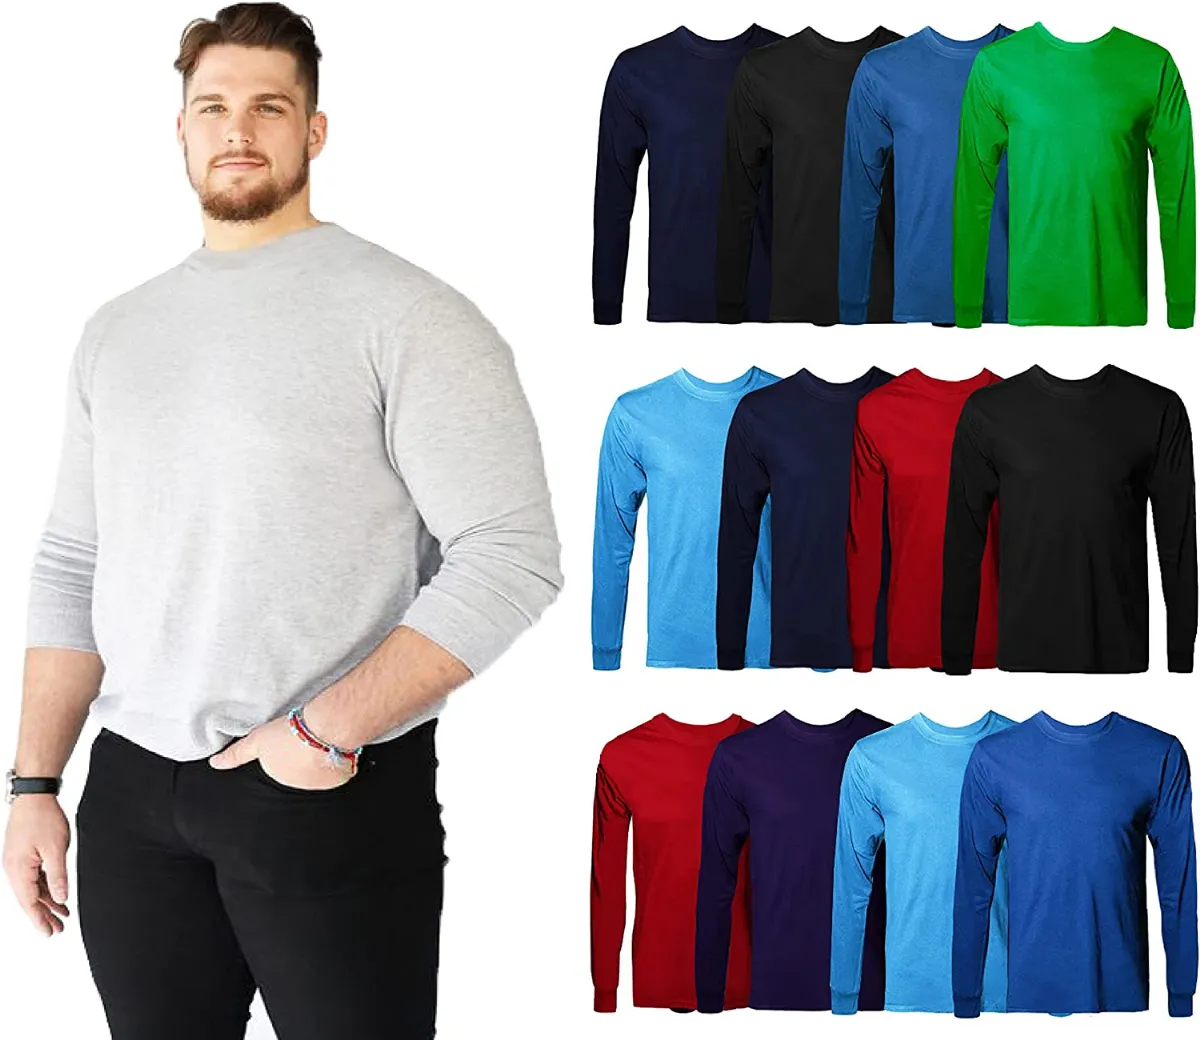 12 Pieces of Mens Cotton Long Sleeve Tee Shirt Assorted Colors Size 3x Large